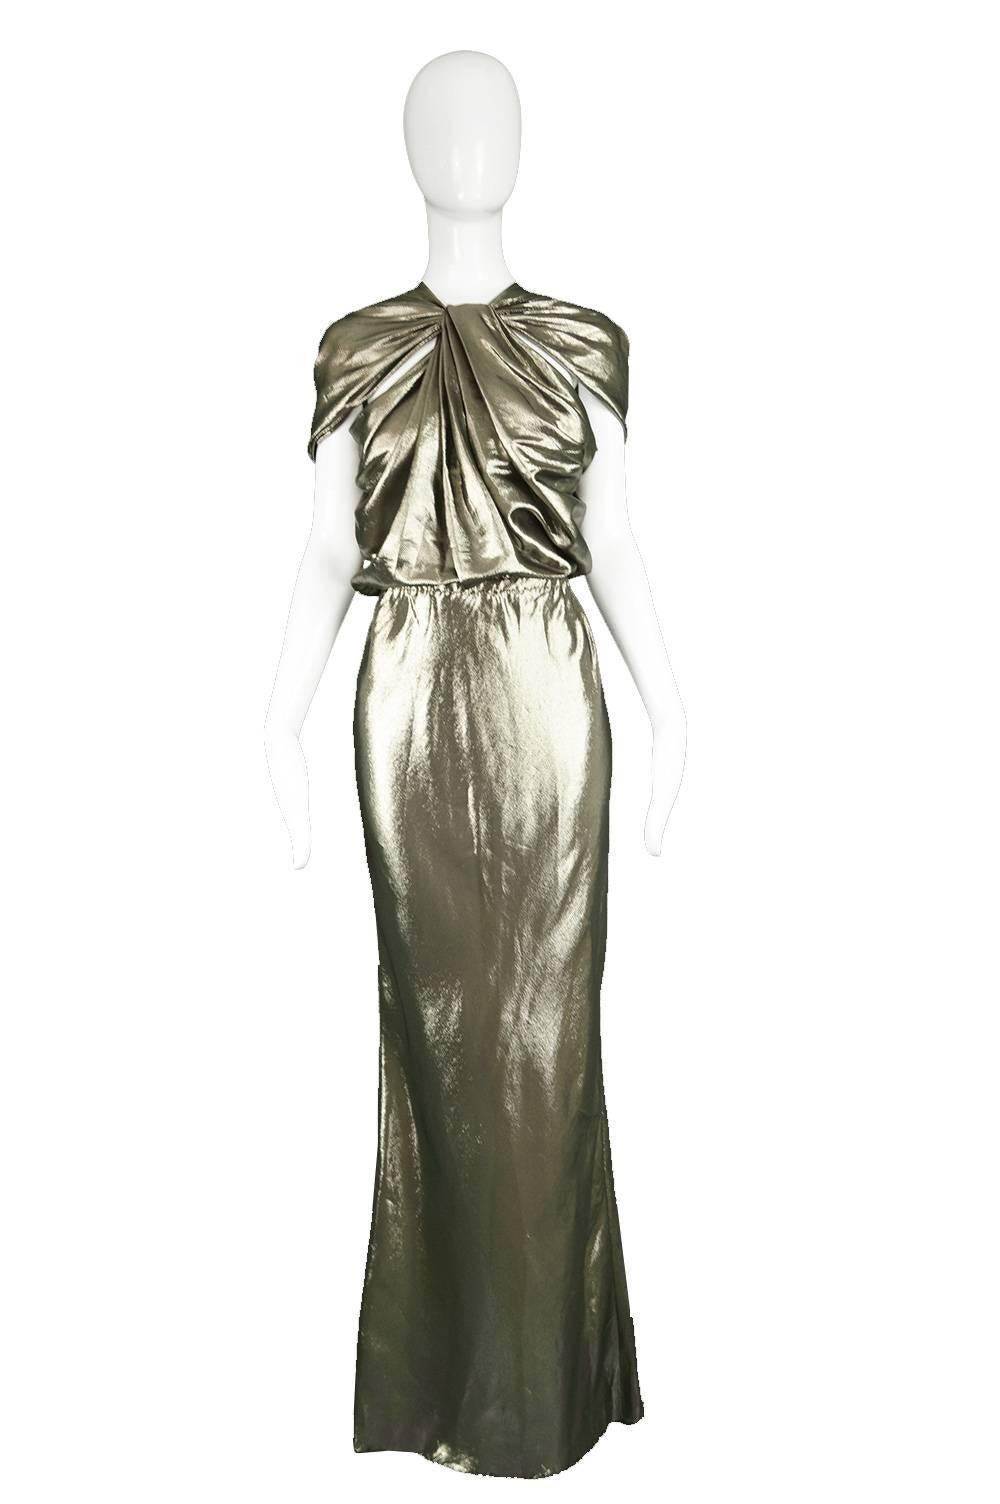 Lanvin Silk Metallic Gold Lurex Floor Length NWT Evening Gown, 2014

Size: Marked EU 40 which is roughly a UK 12/ US 8. Please check measurements
Bust - More dependent on waist due to open style
Waist - Stretches from 28-34” / 71-86cm
Hips - Up to